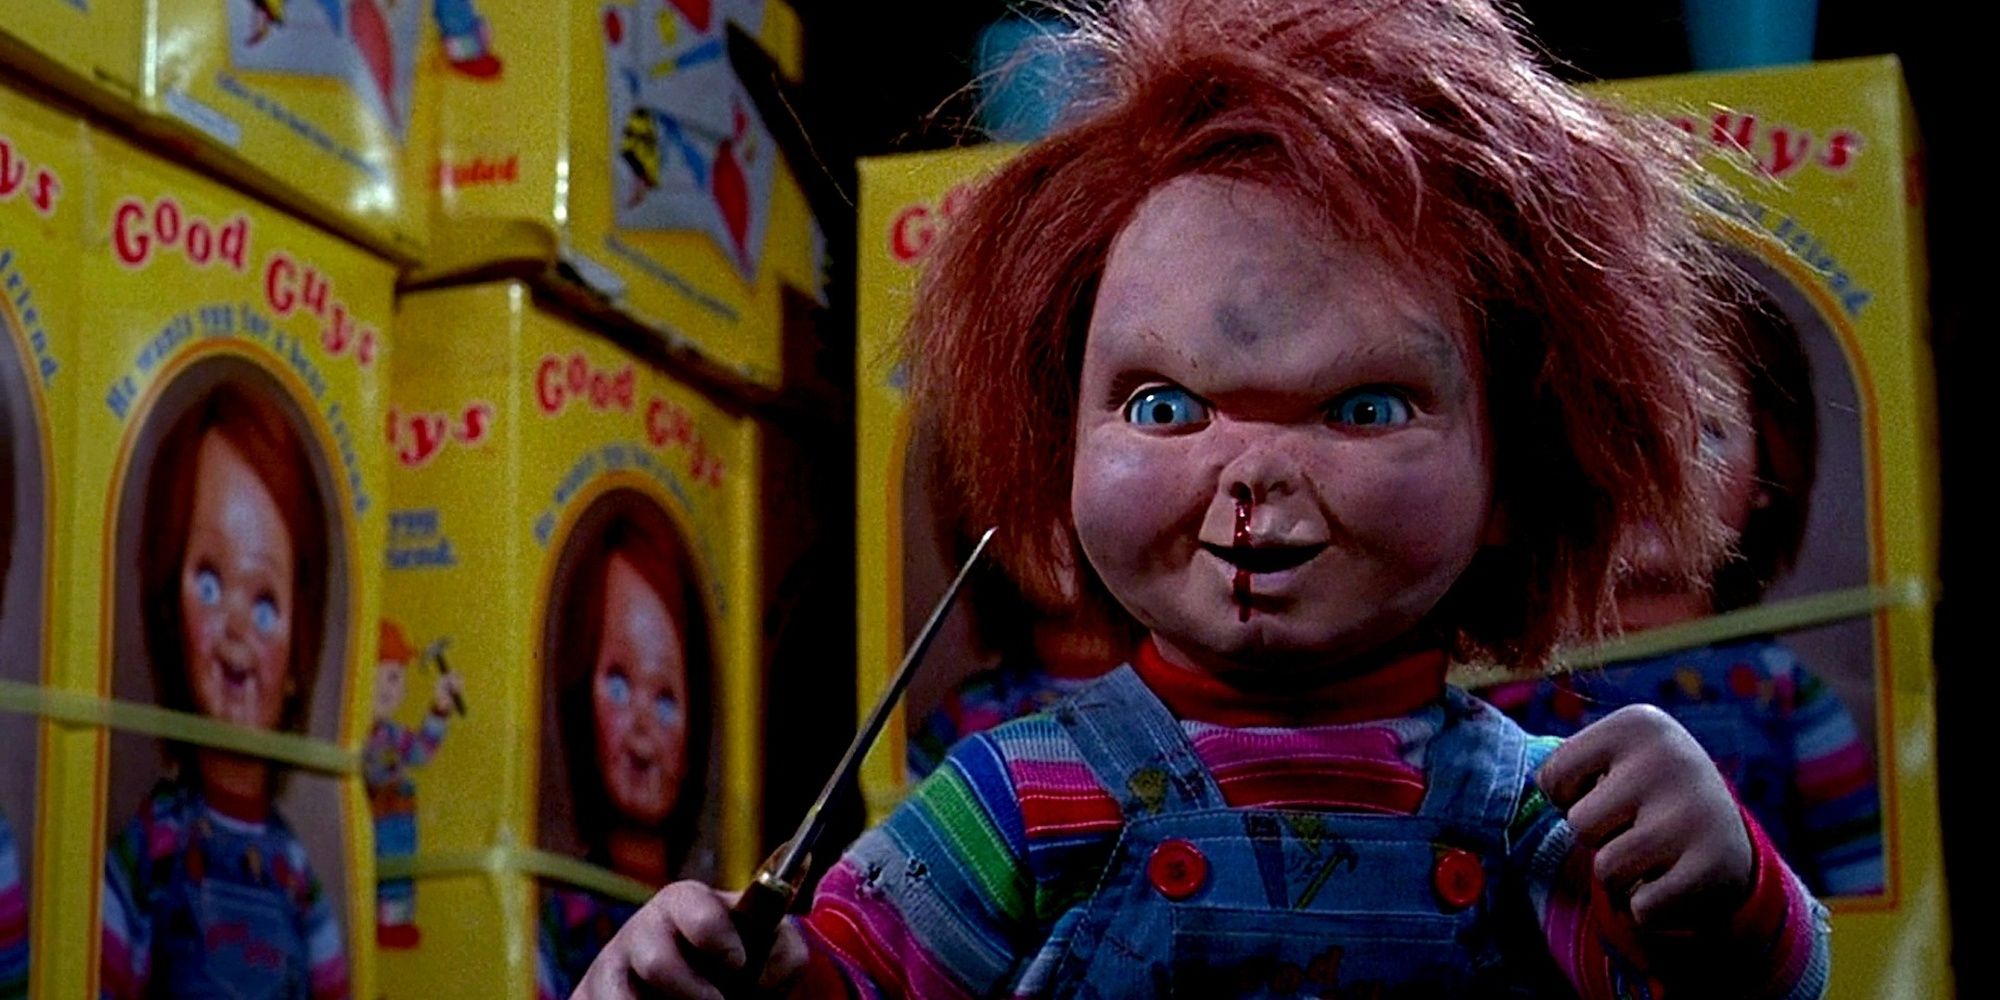 Chucky wielding a knife in Child's Play 2